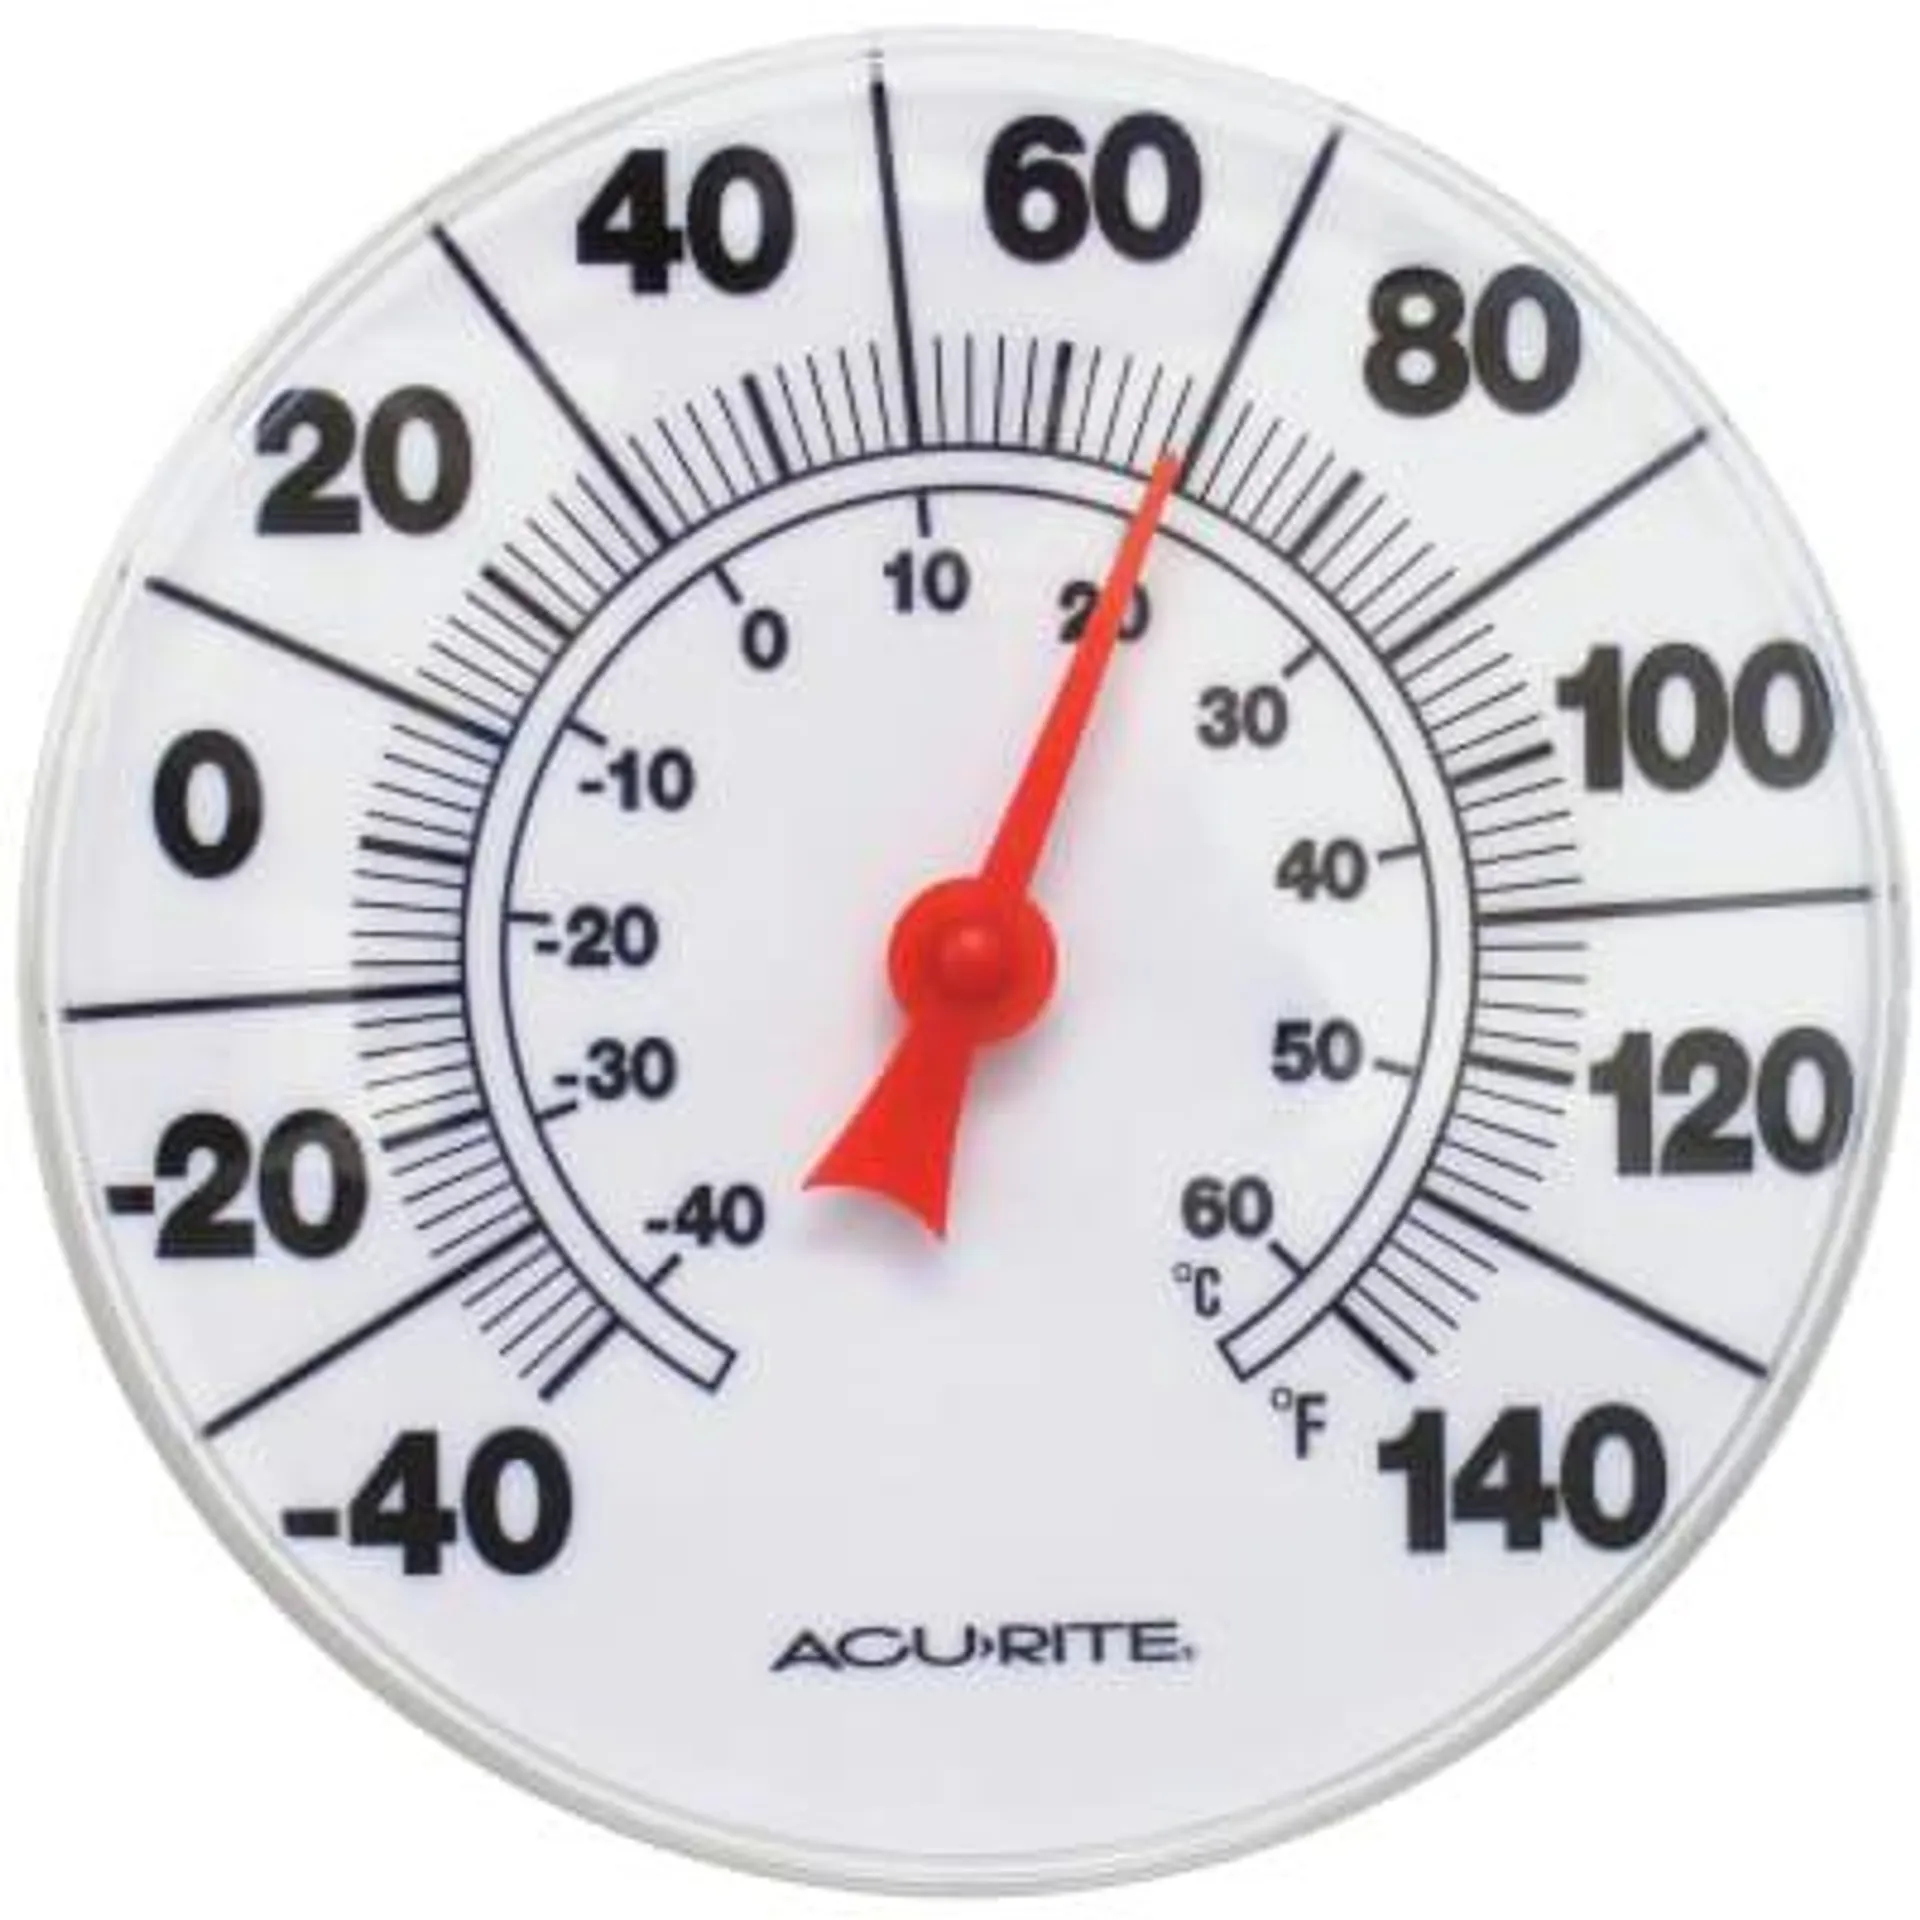 AcuRite 8 in Basic Coil Thermometer